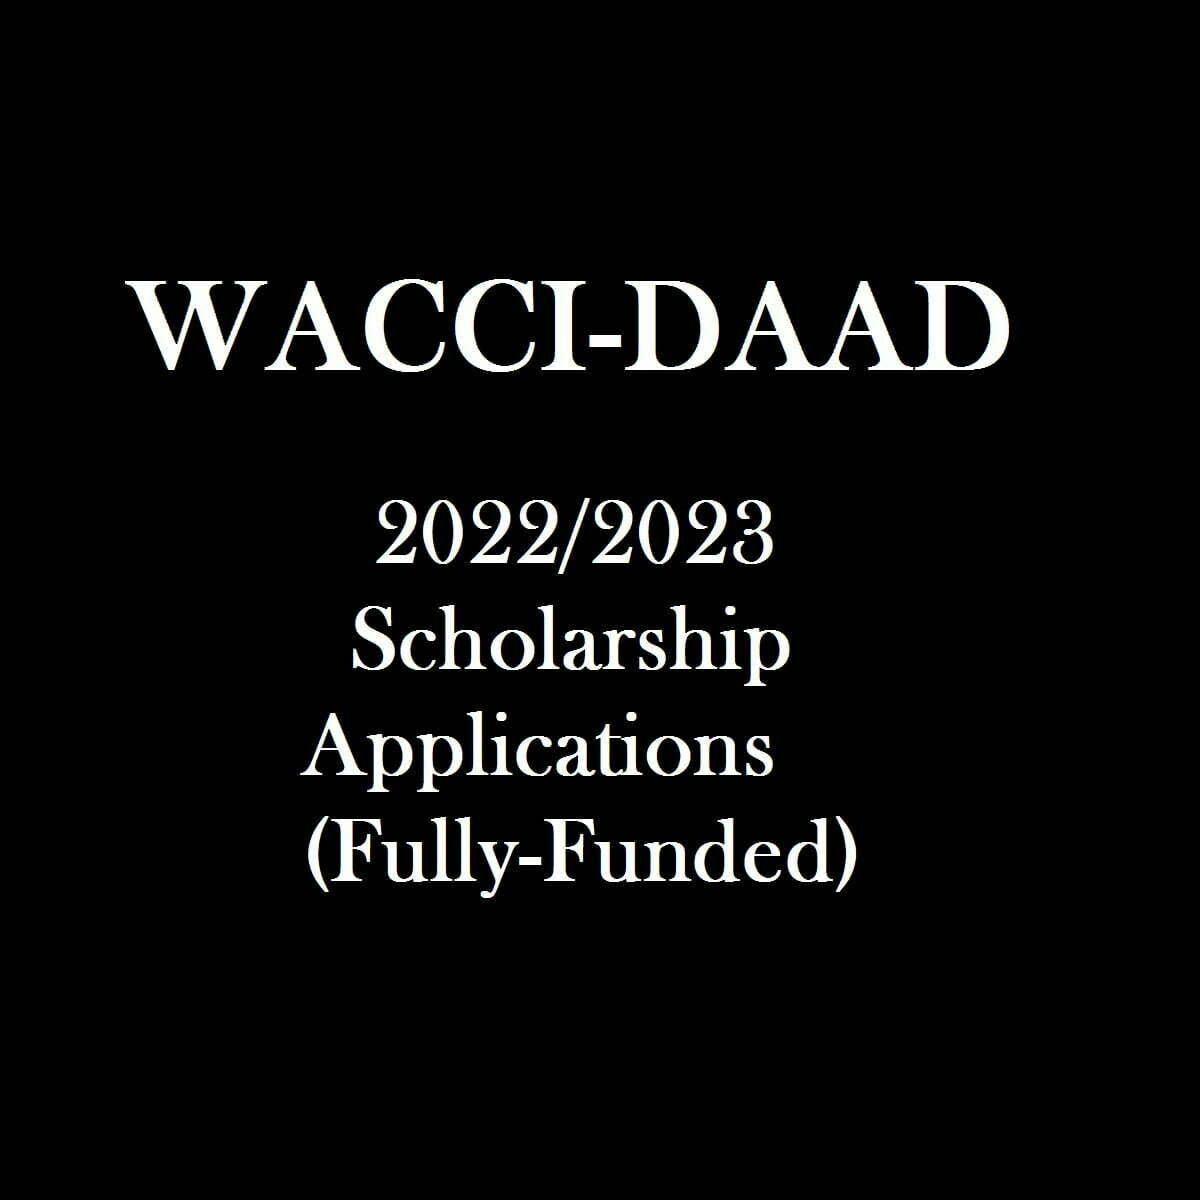 WACCI-DAAD 2022/2023 Scholarship Applications (Fully-Funded)